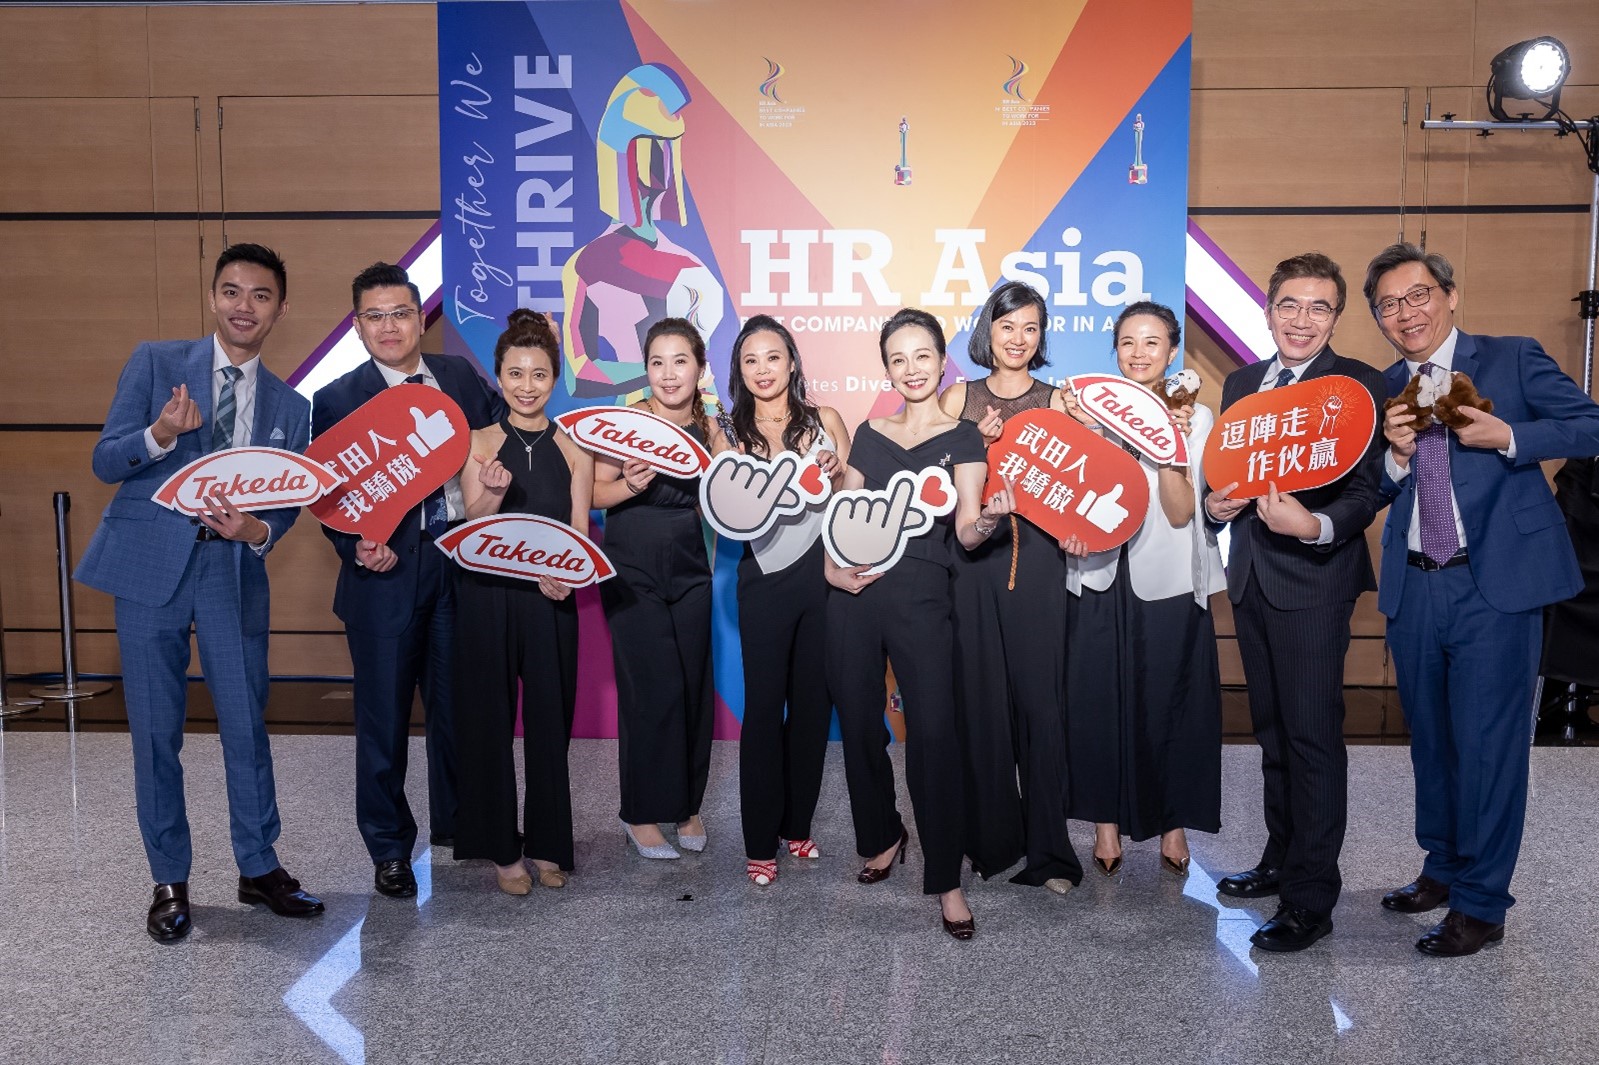 Employees in HR Asia event